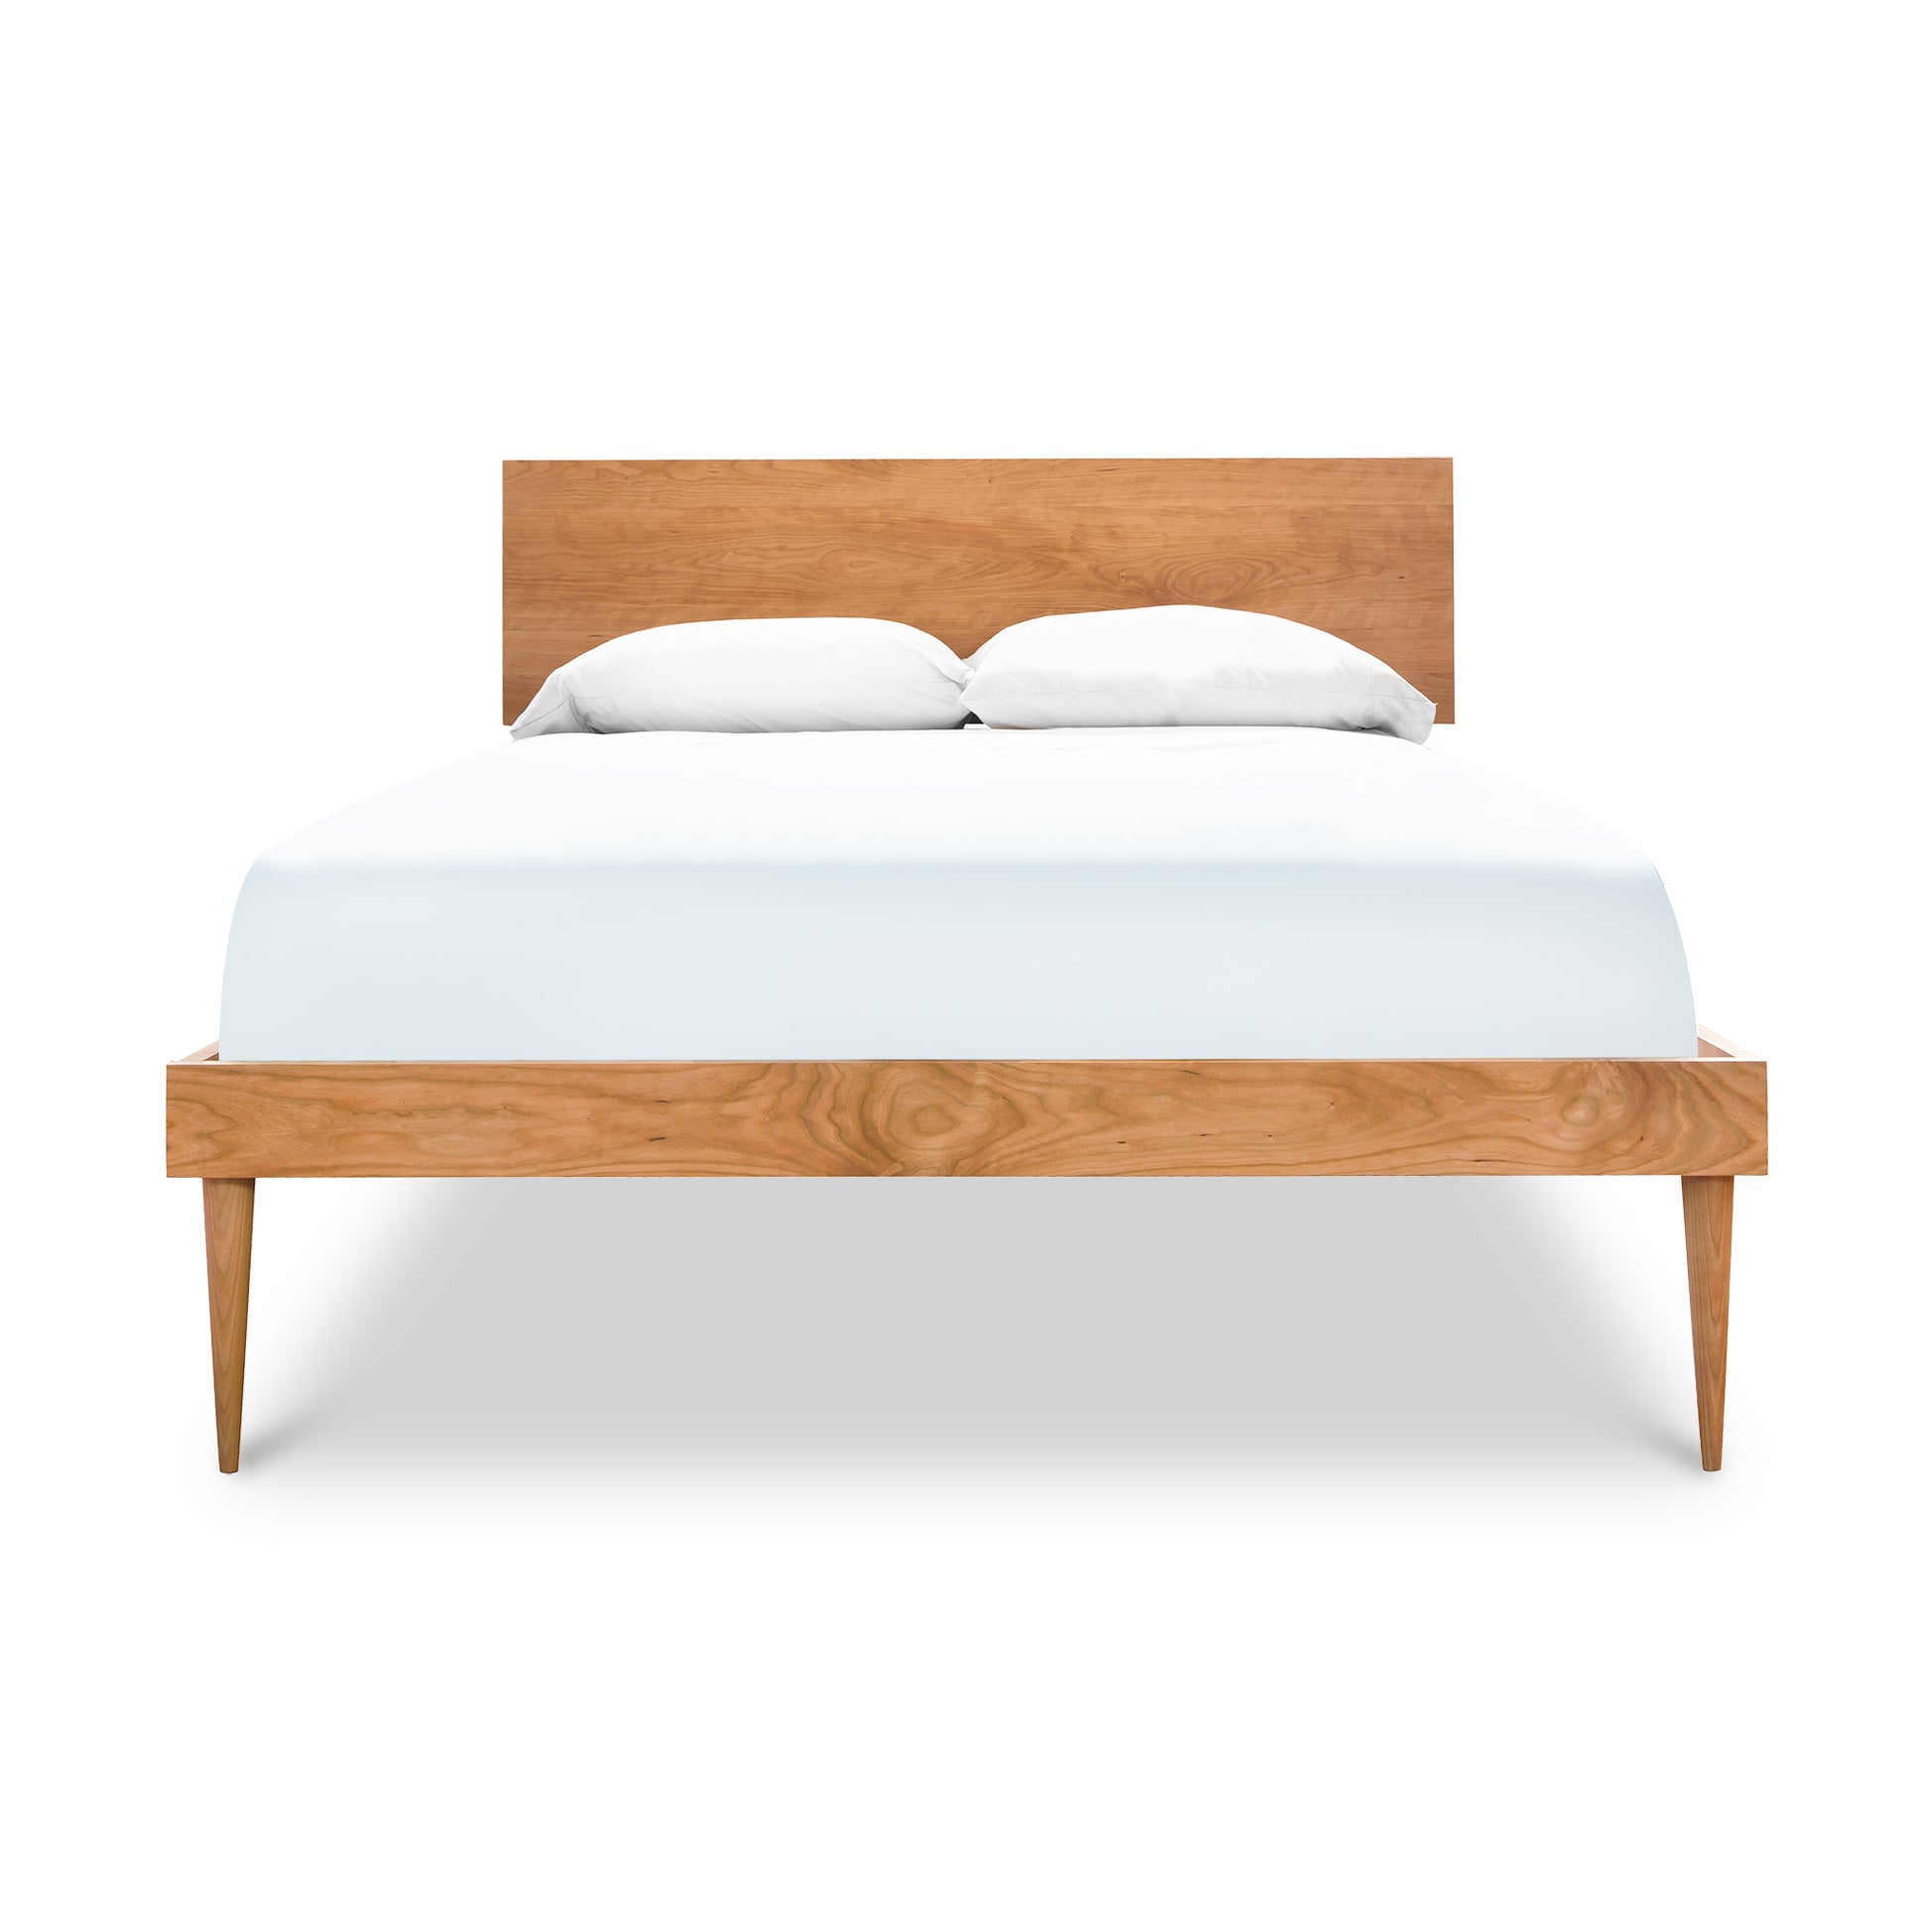 A minimalist, Larssen Bed platform bed frame with a white mattress and two pillows, isolated on a white background.